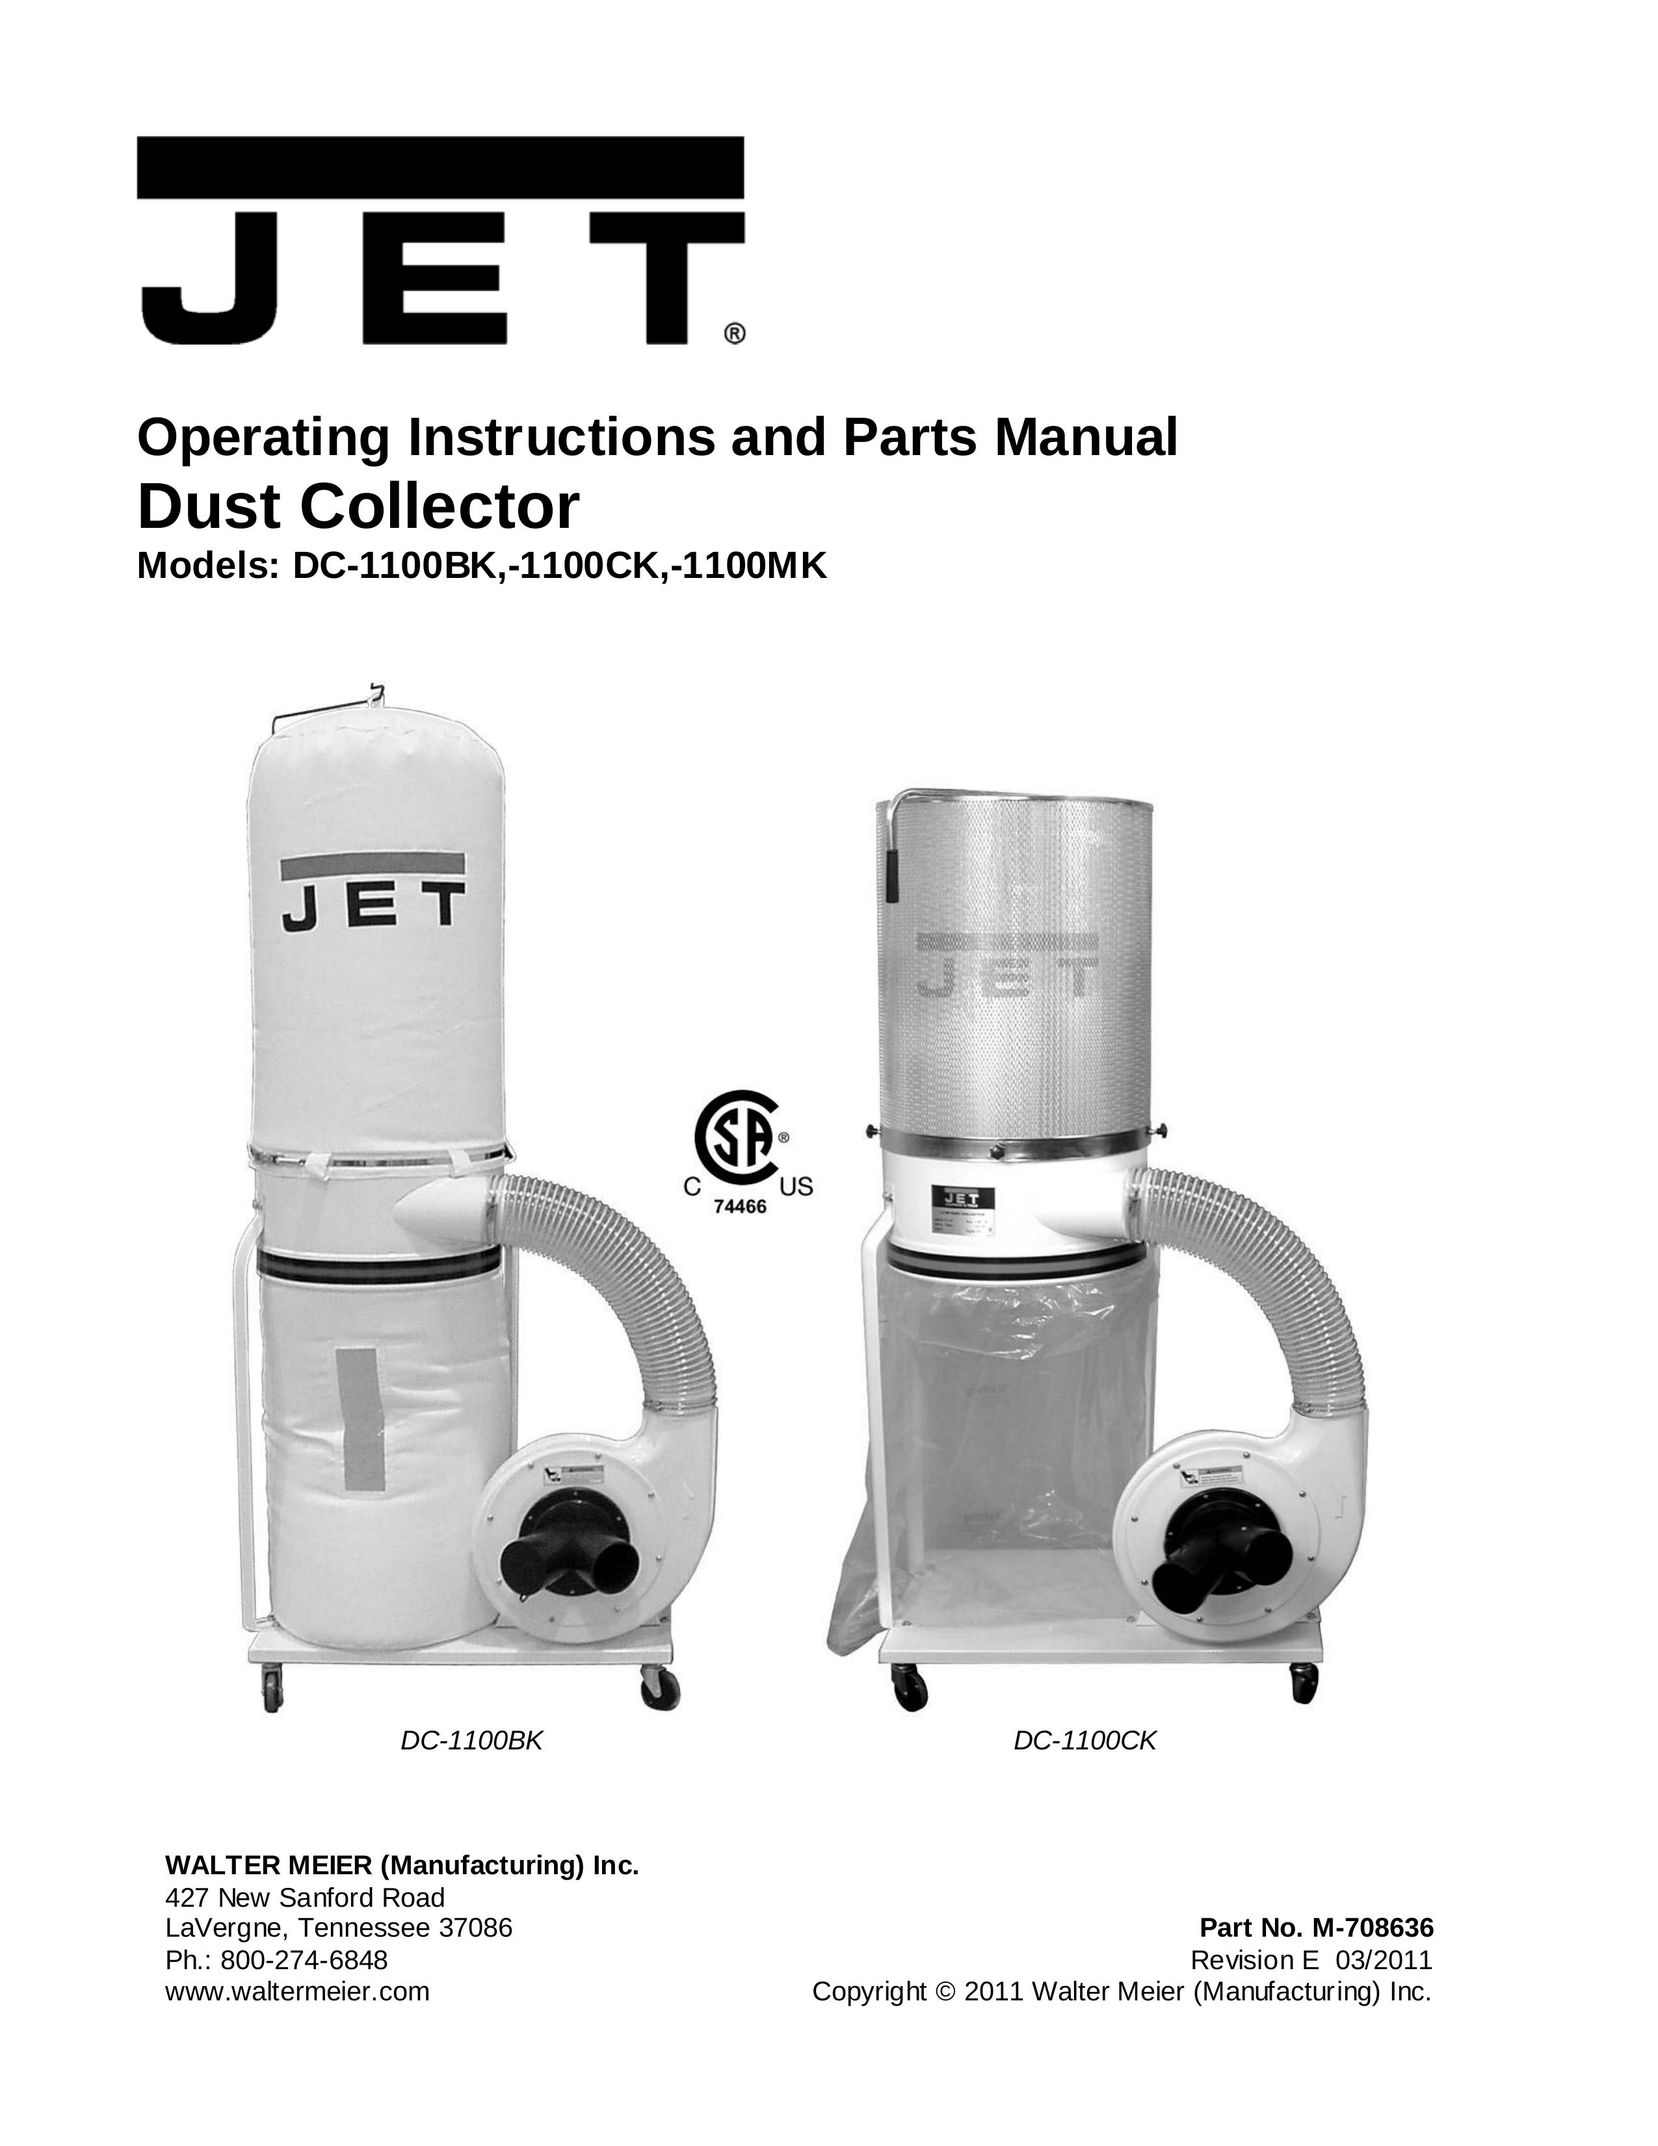 Jet Tools DC-1100CK Dust Collector User Manual